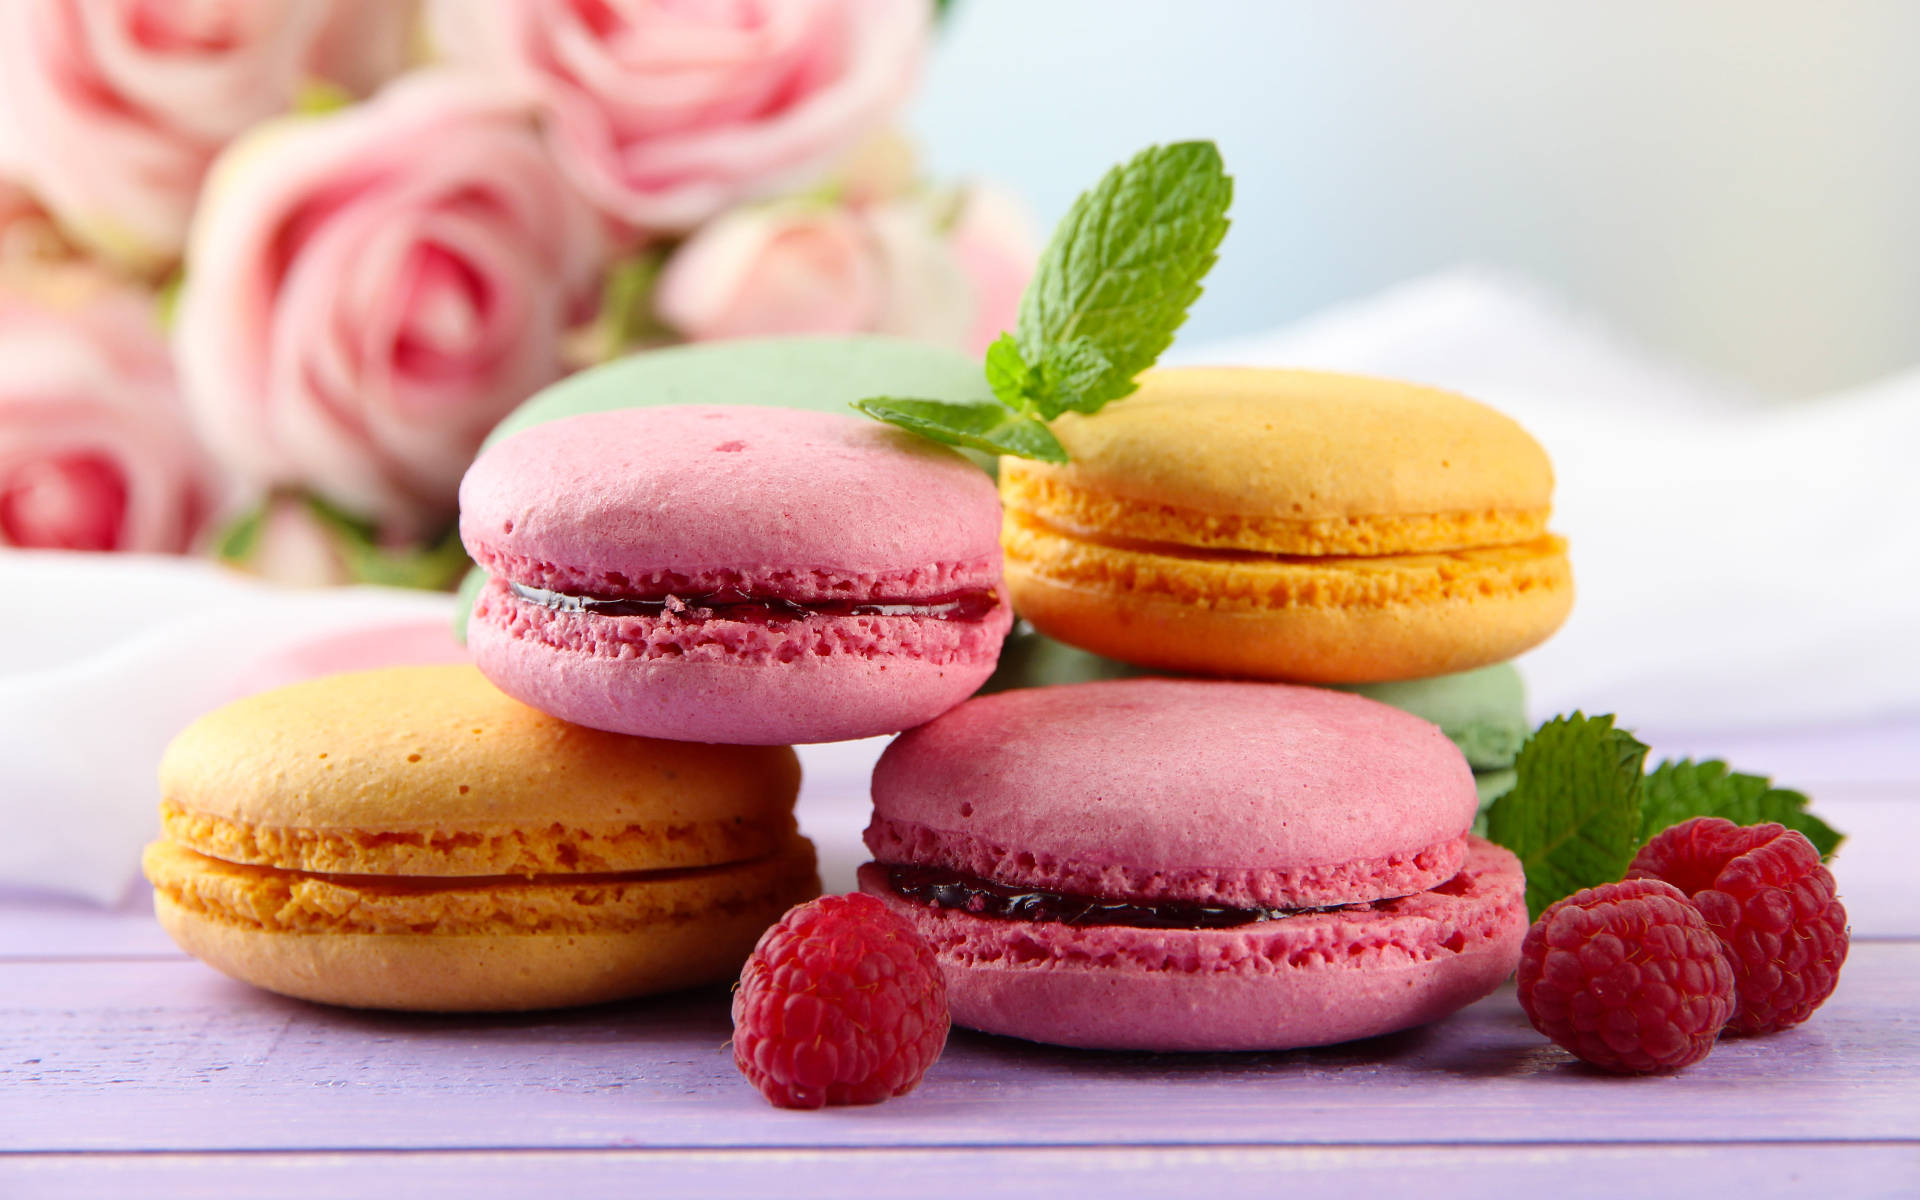 Colorful Macarons And Berries Background